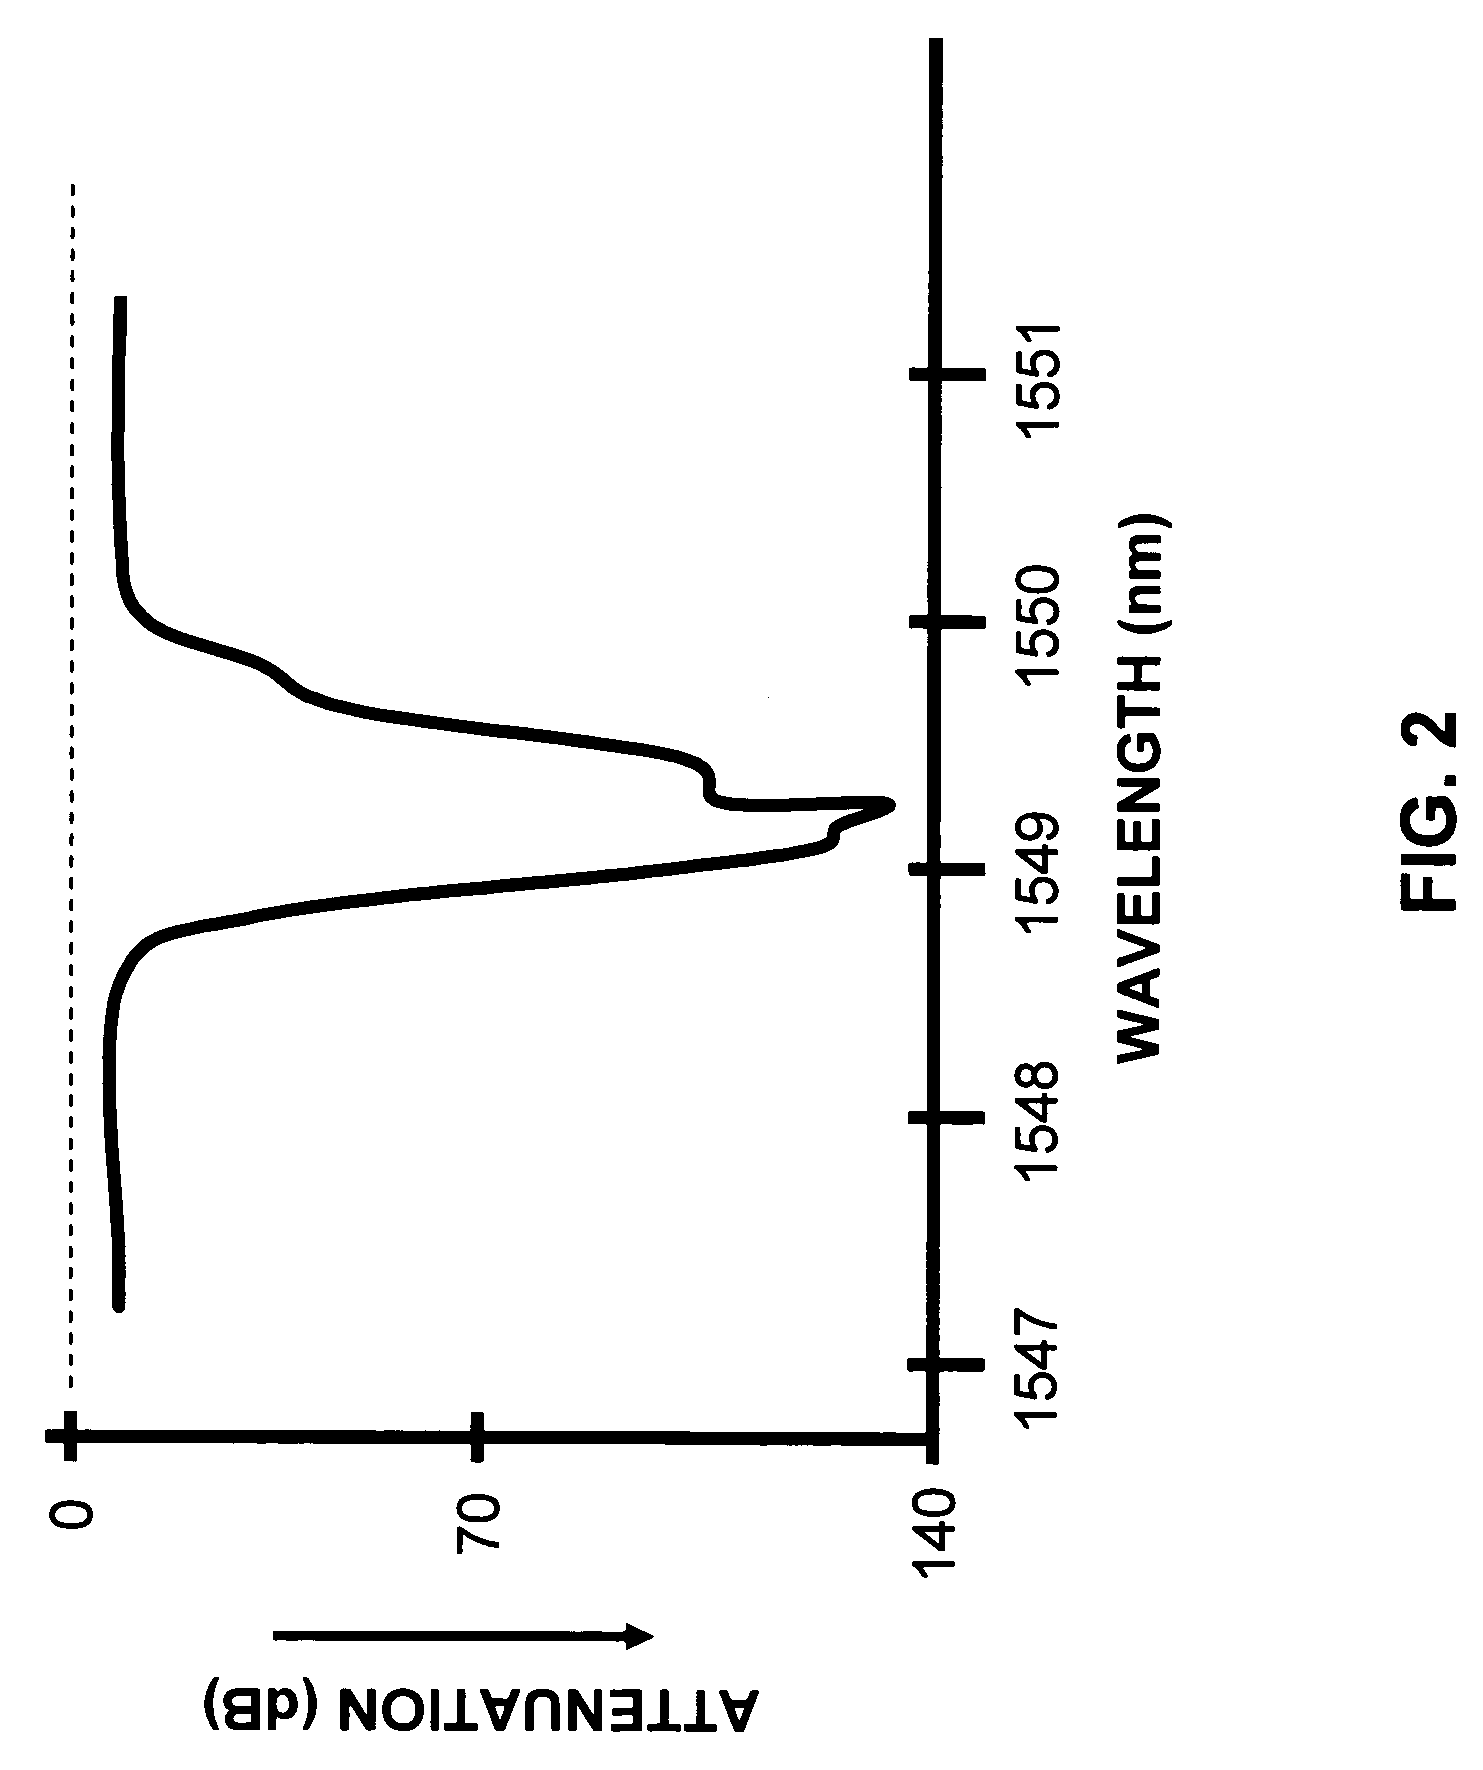 Systems and methods for transmitting quantum and classical signals over an optical network